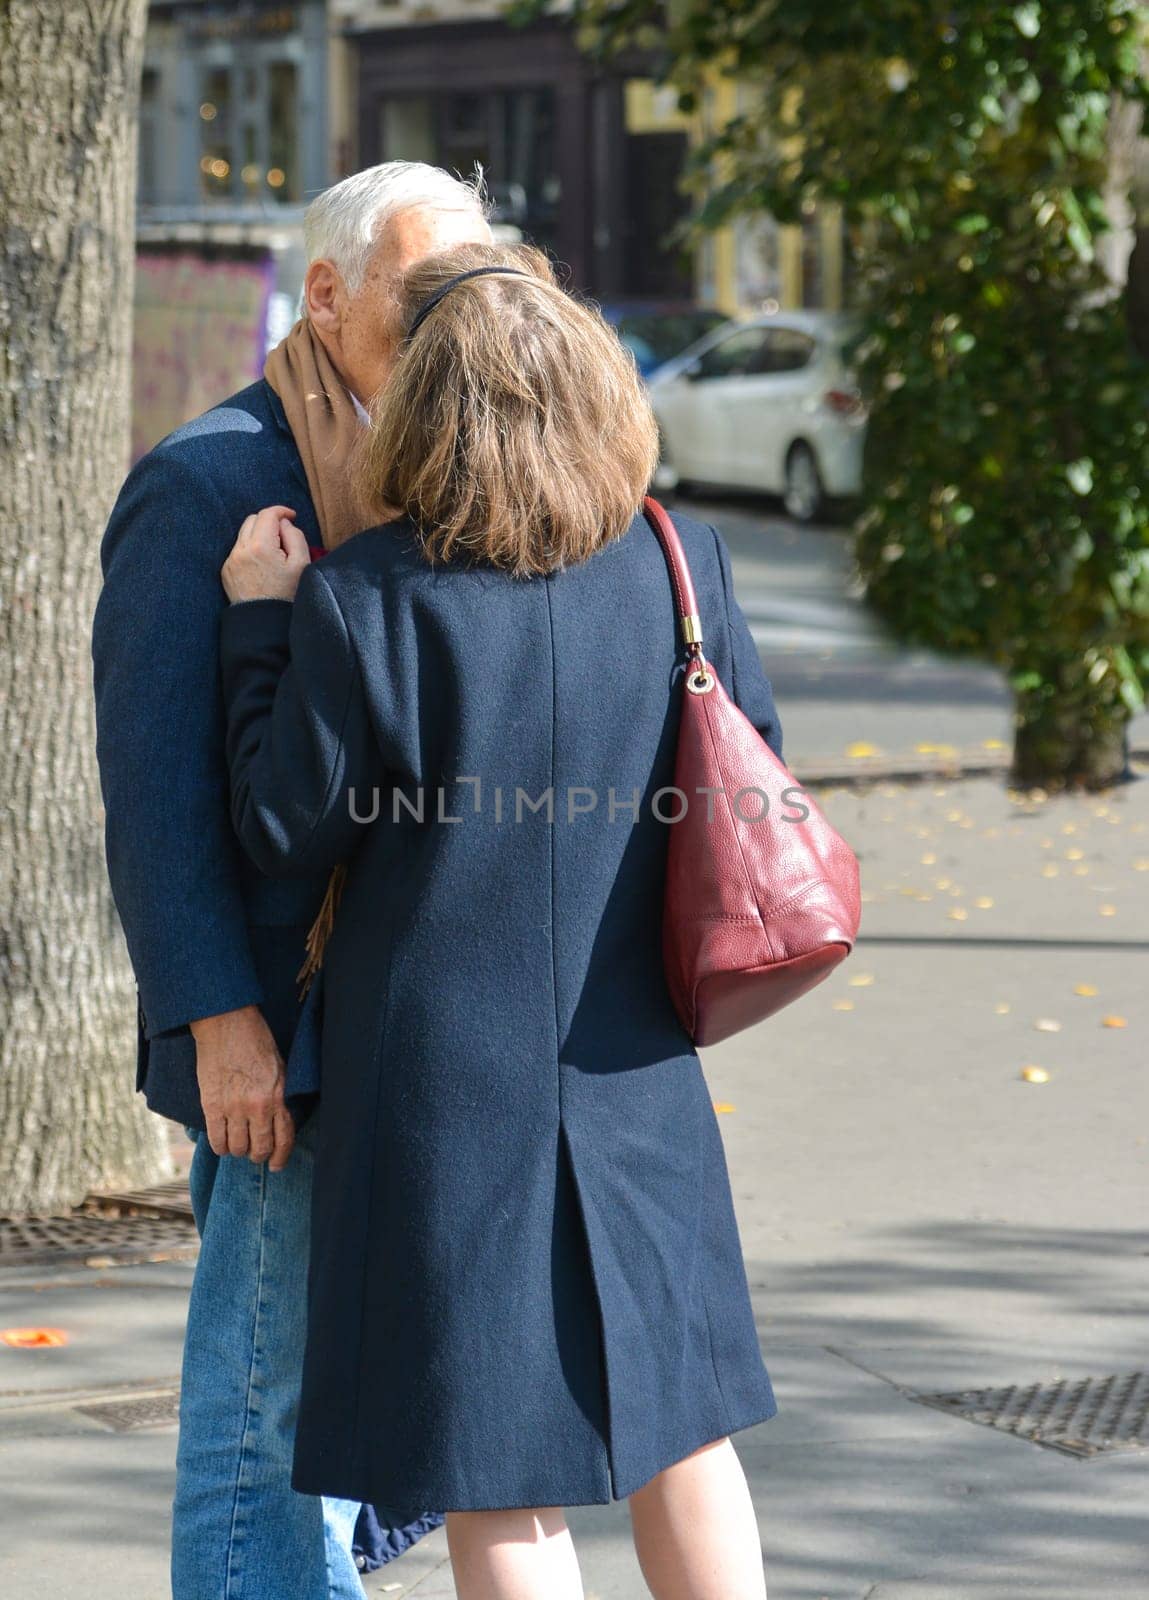 romantic elderly whit haired couple kissing outdoors